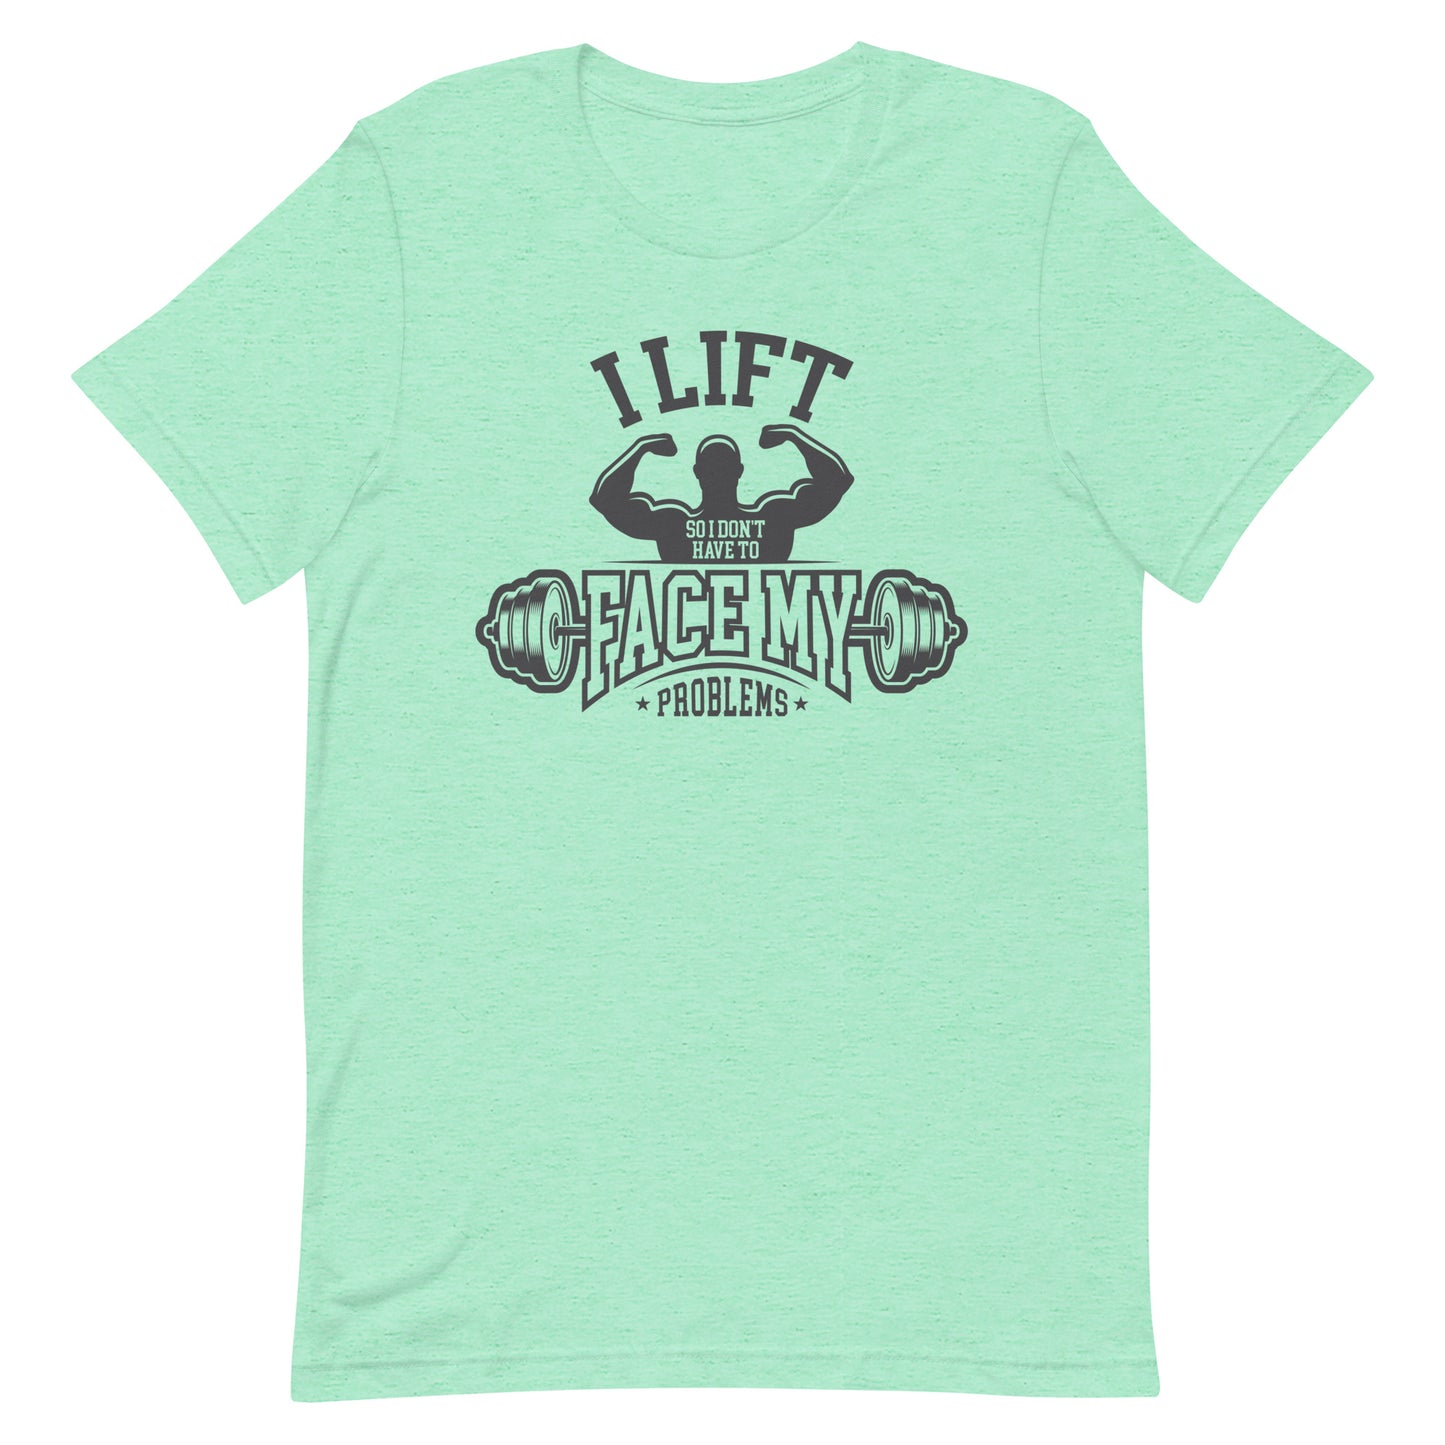 I Lift So I Don't Have to Face My Problems Unisex t-shirt